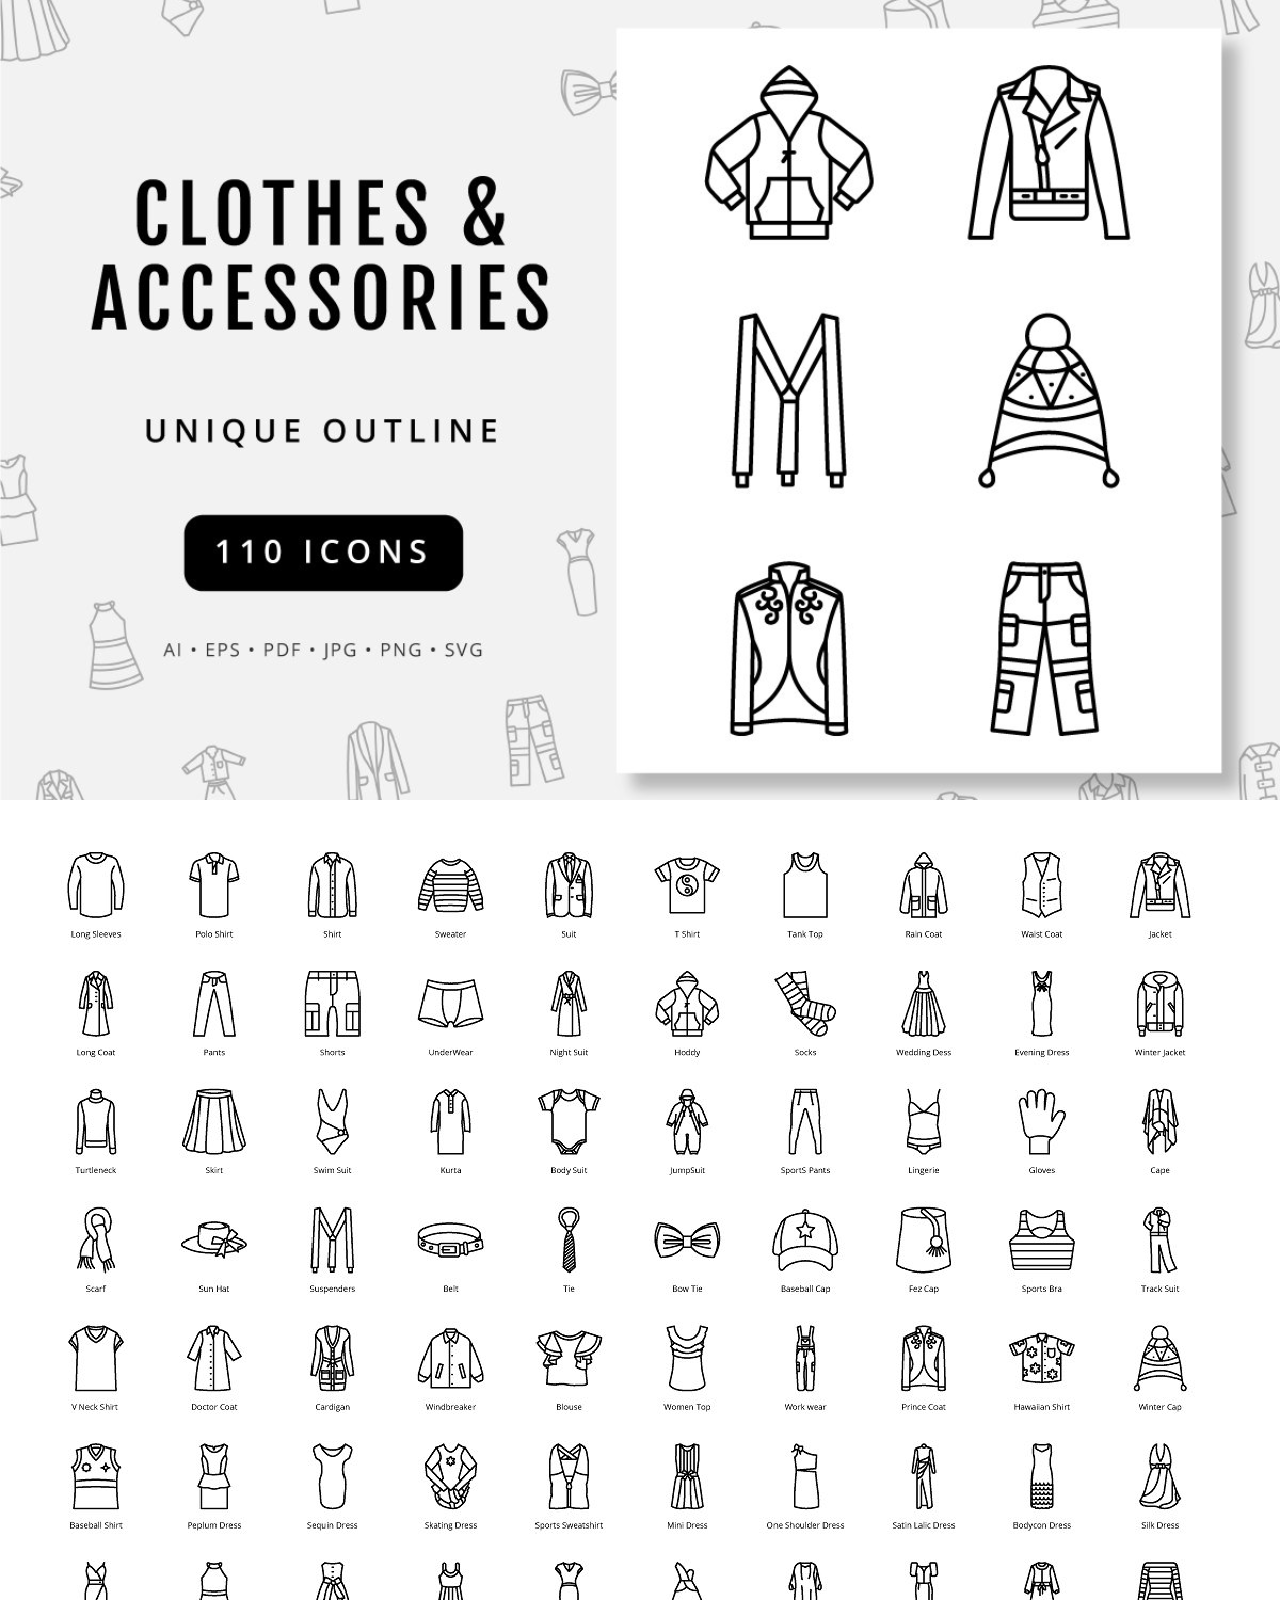 Clothe and accessories outline icons pinterest image preview.